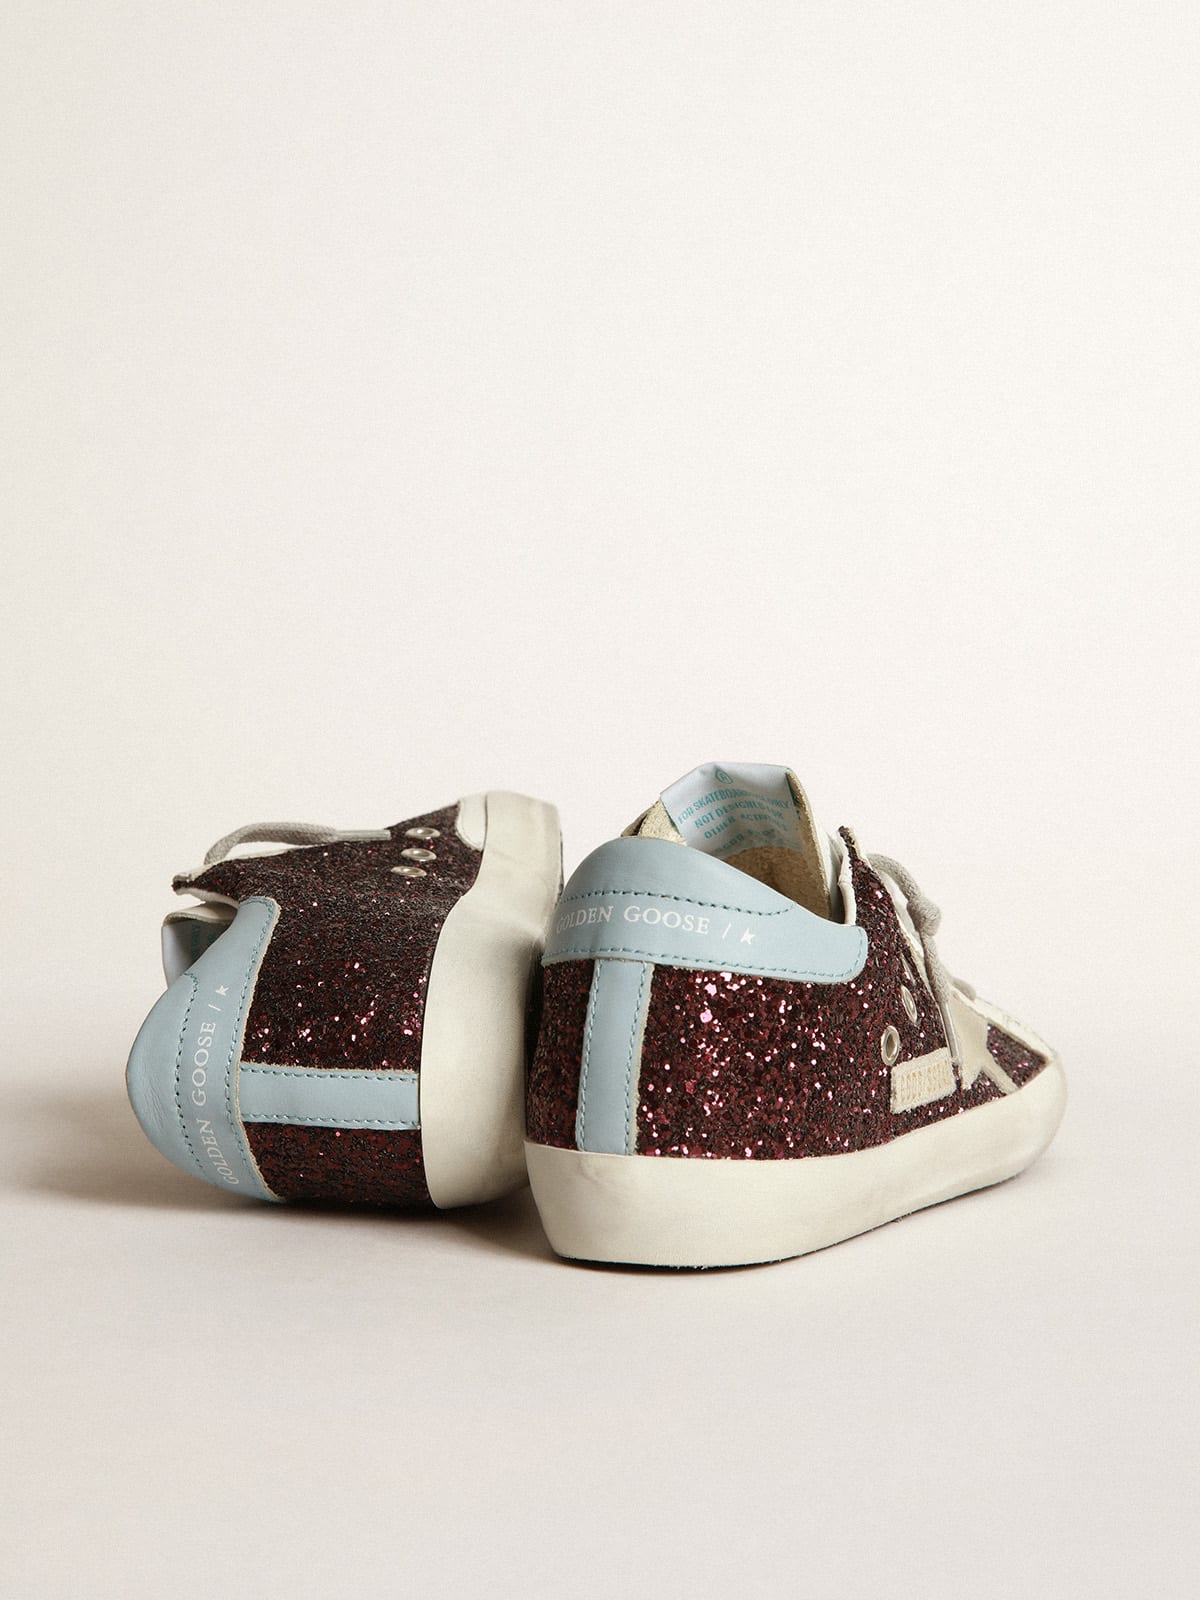 Golden Goose - Super-Star sneakers in burgundy glitter with ice-gray suede star and light blue leather heel tab in 